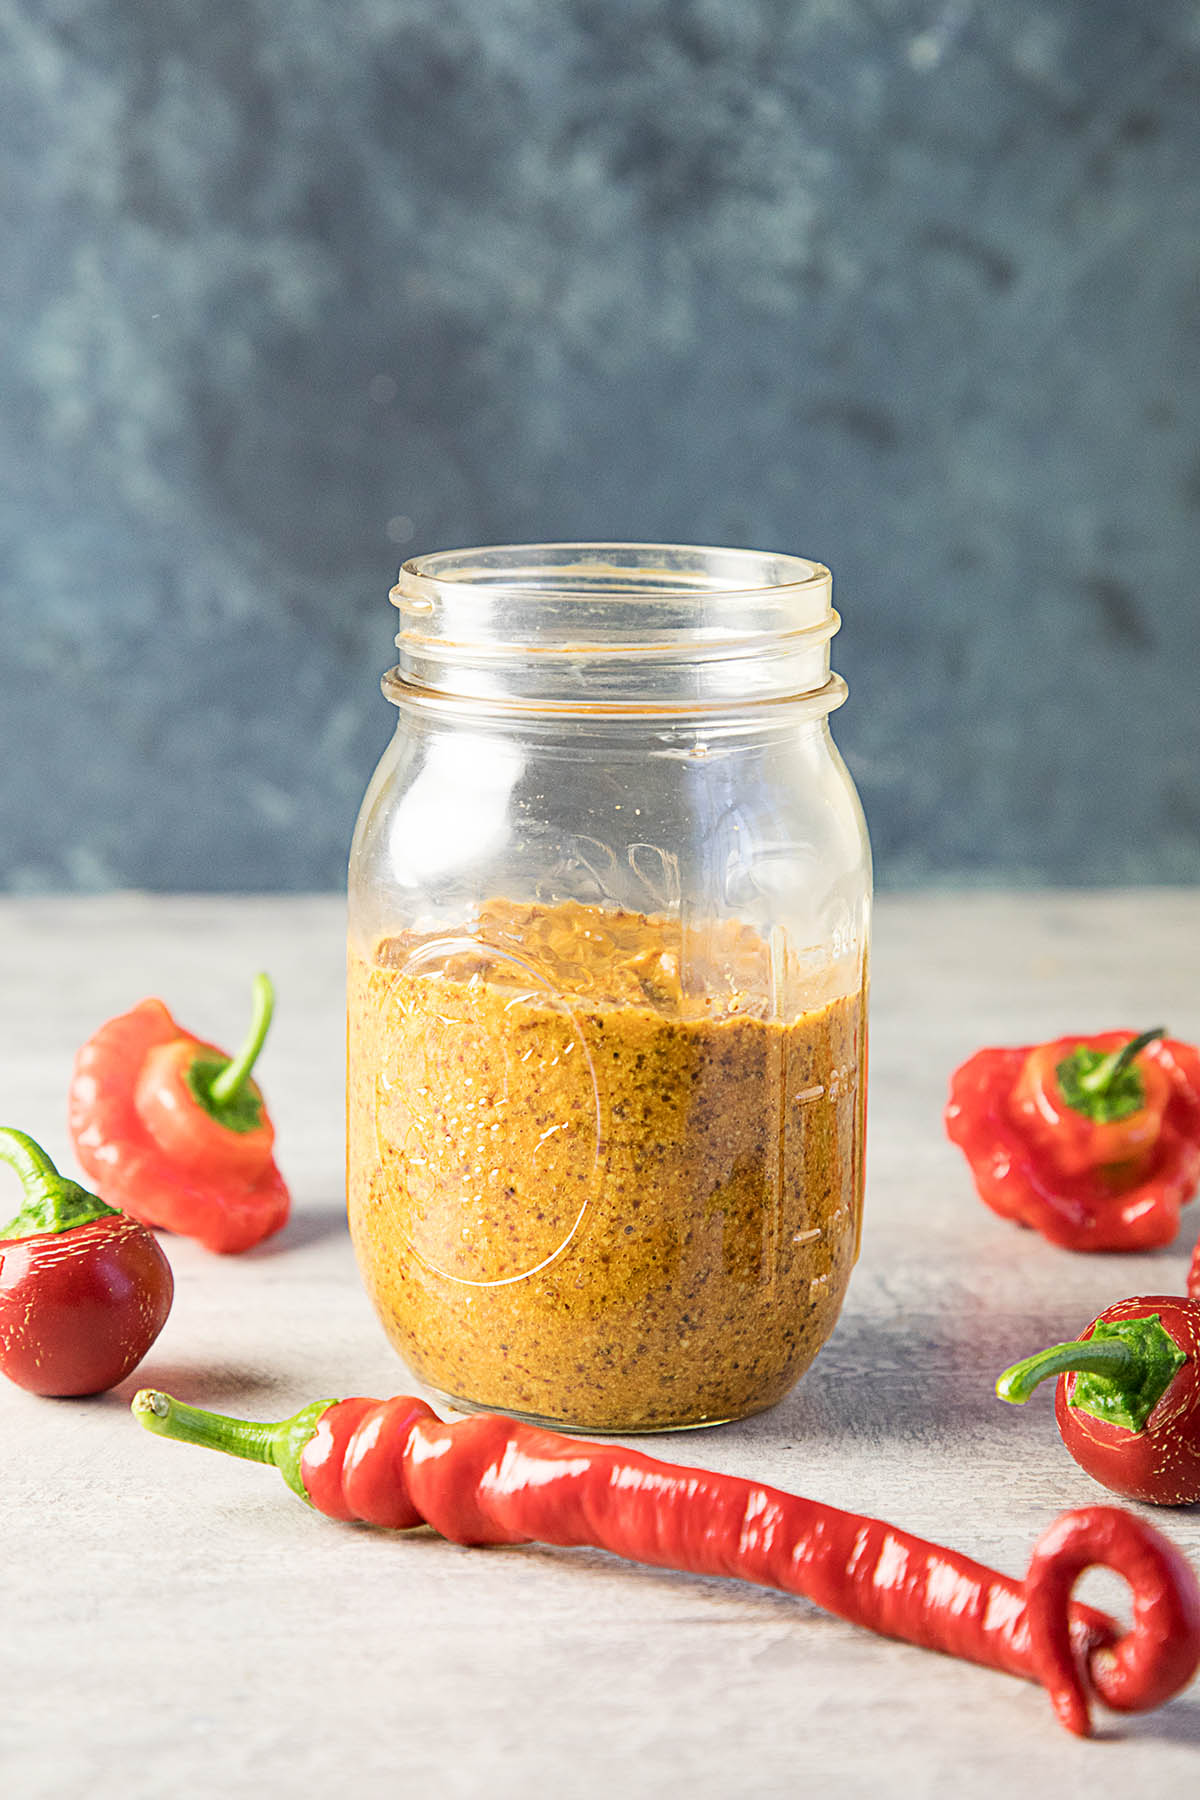 Homemade Chipotle Honey Mustard served in a jar and looking extremely delicious